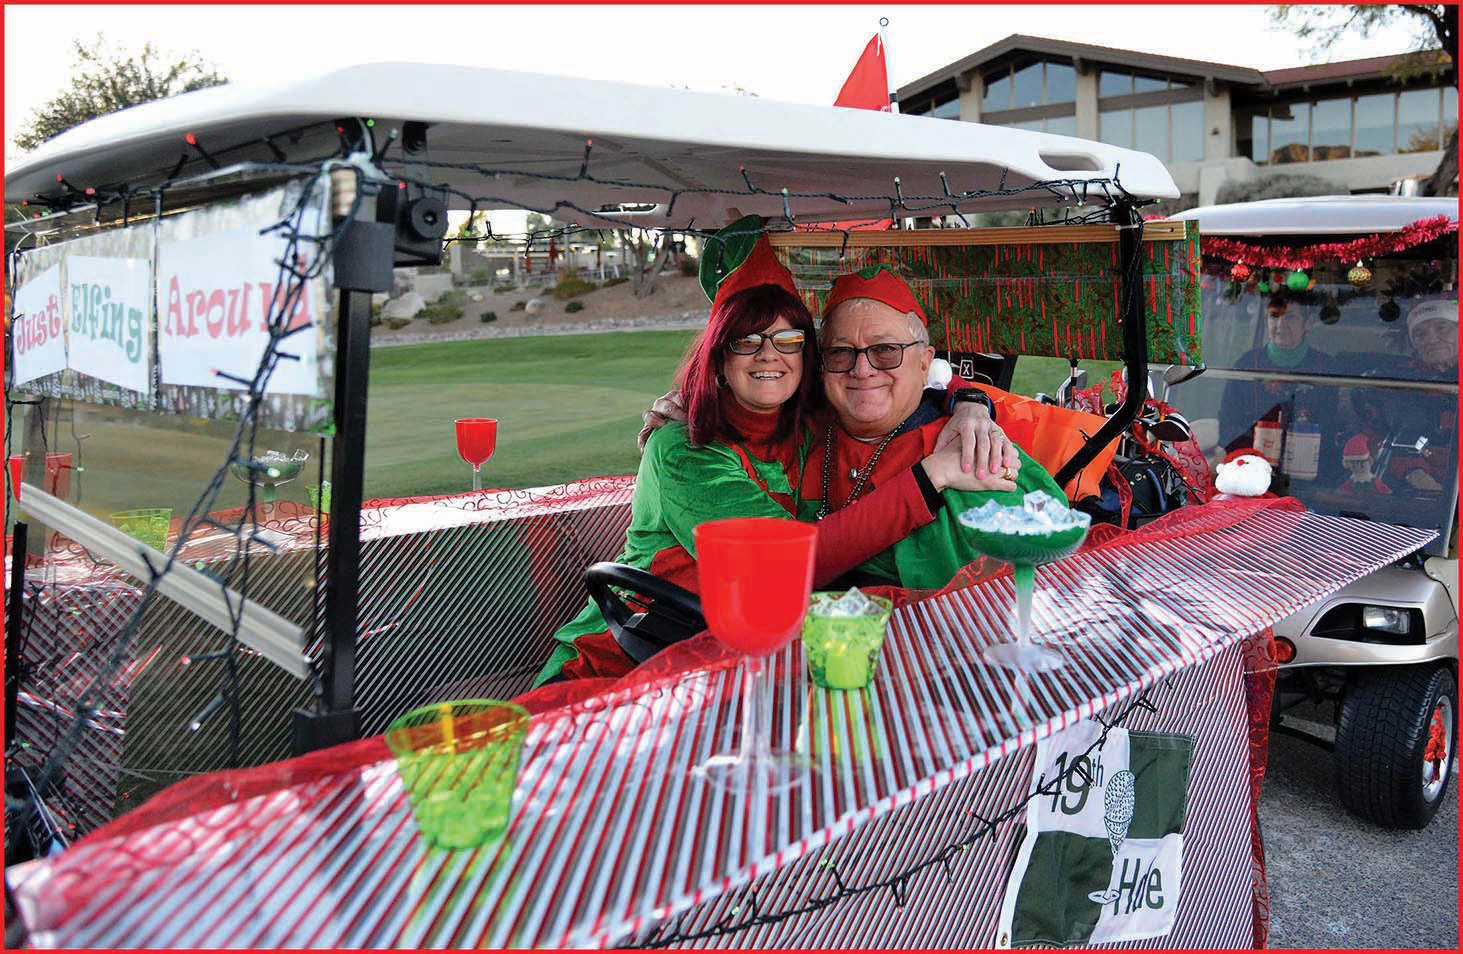 Best golf car winners Kathy and Steve Sanchez for their Mr. and Mrs. Santa Claus sled